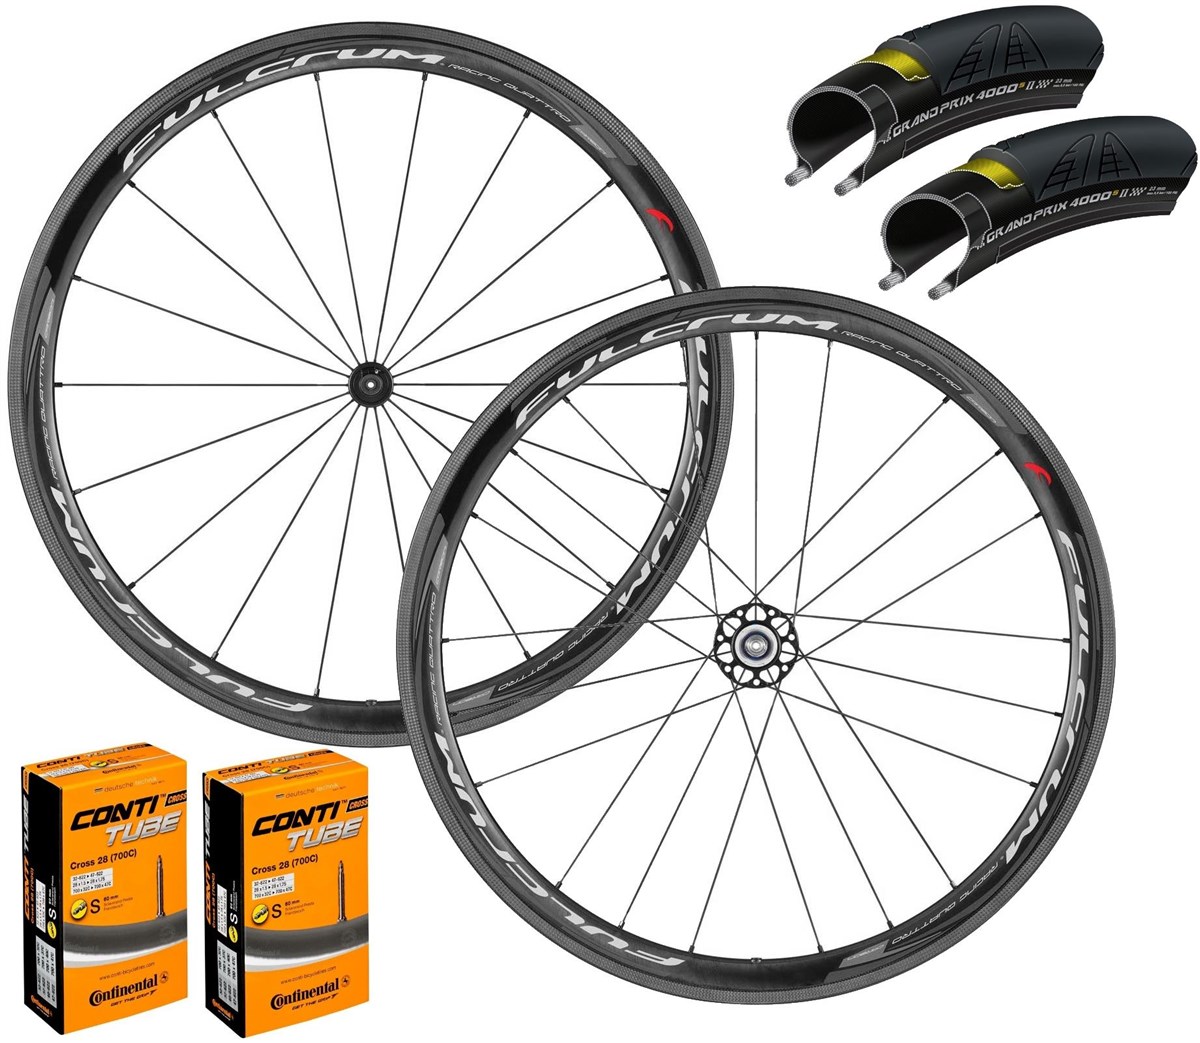 Fulcrum Racing Quattro Carbon Wheelset with Grand Prix 4000 S II Tyres & Tubes product image